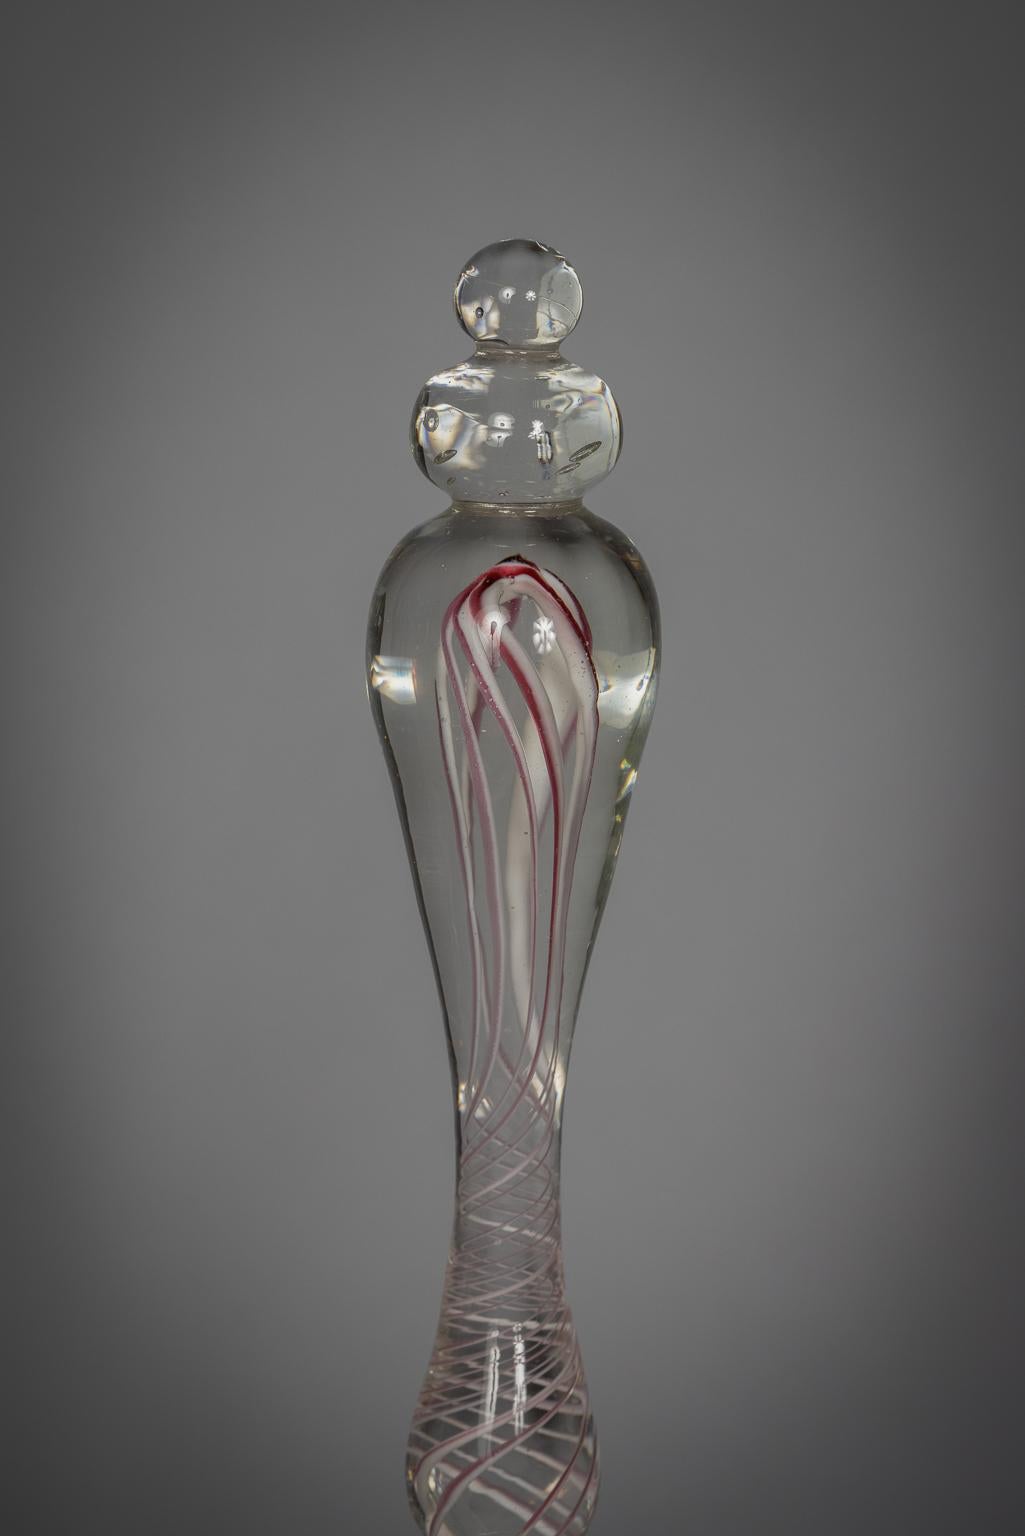 White bells with red lip and internal red spiral handles with clear dripped glass clacker.